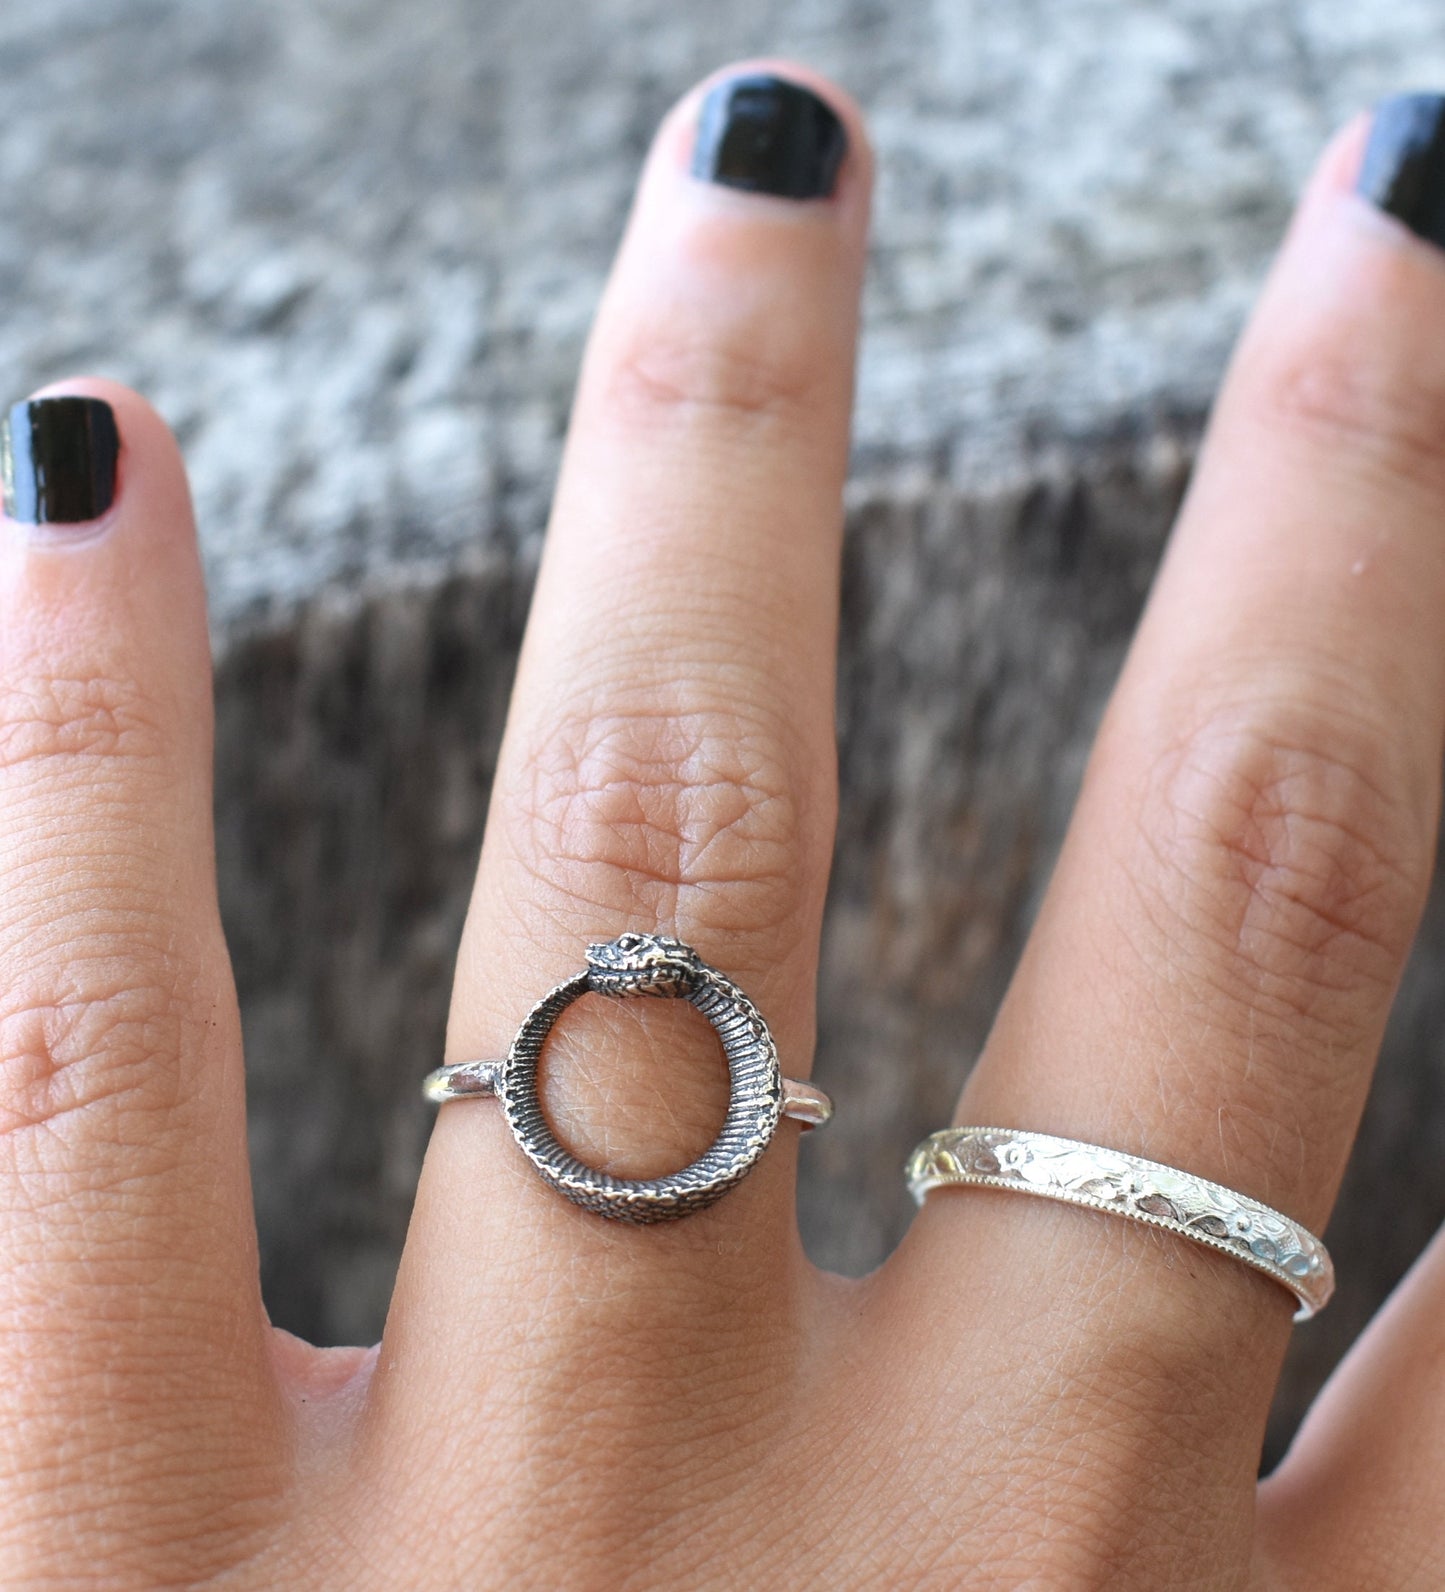 Ouroboros Ring- Snake Ring, Silver Snake Ring, Ouroboros Jewelry, Serpent Ring-Aes Sedai